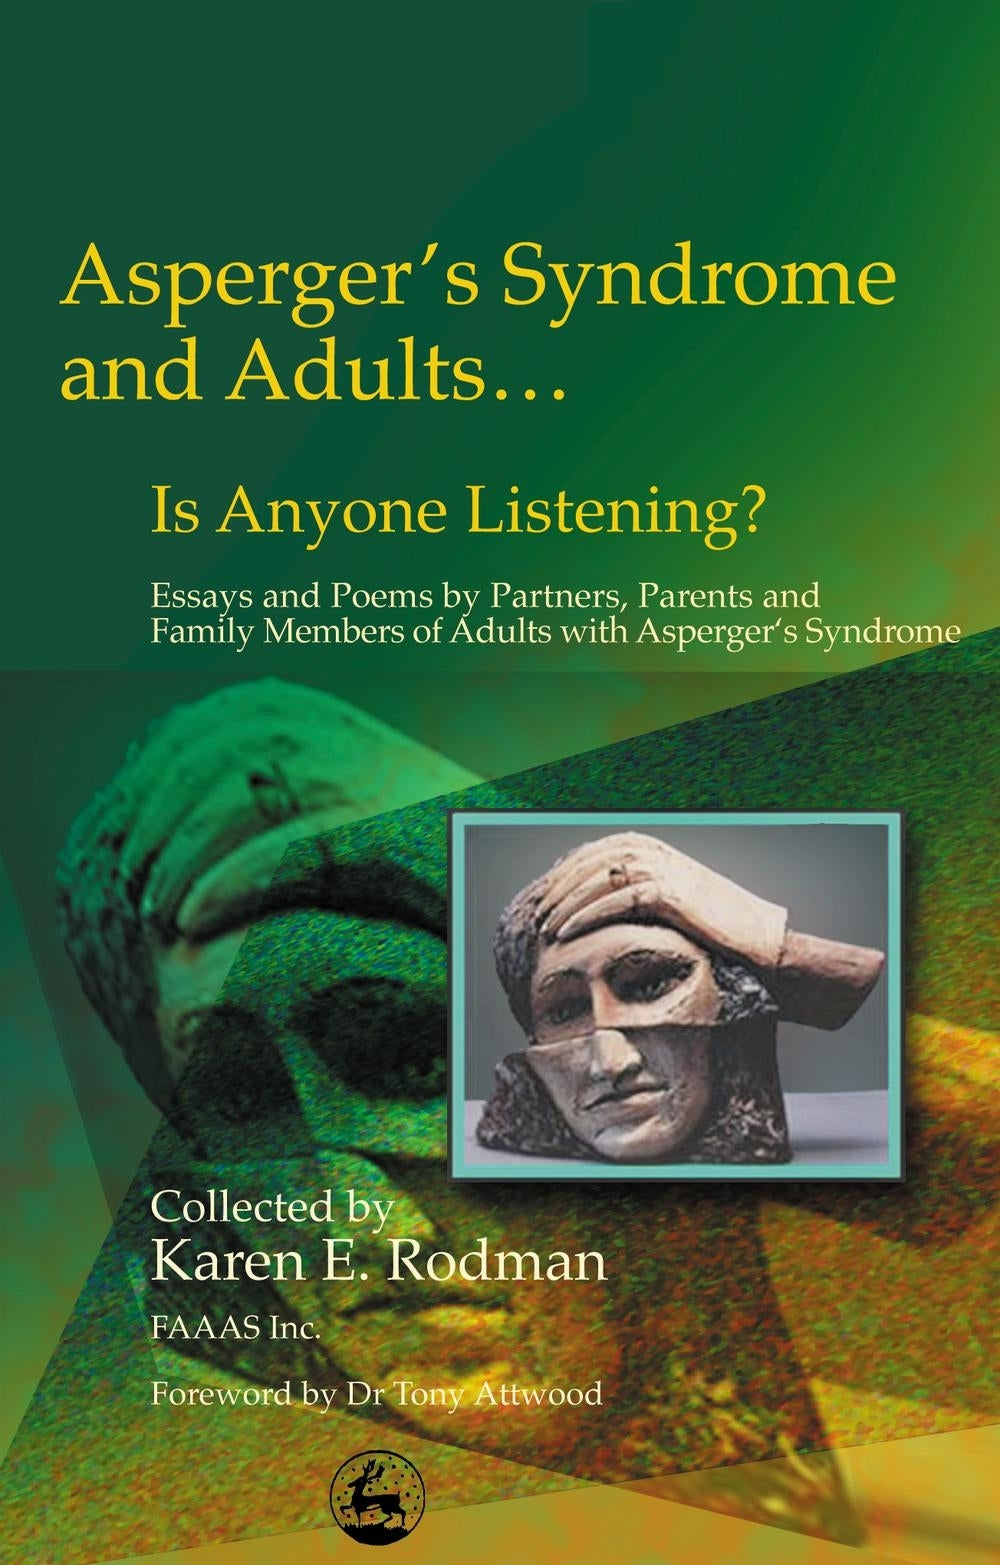 Asperger Syndrome and Adults... Is Anyone Listening? by Dr Anthony Attwood, Karen Rodman